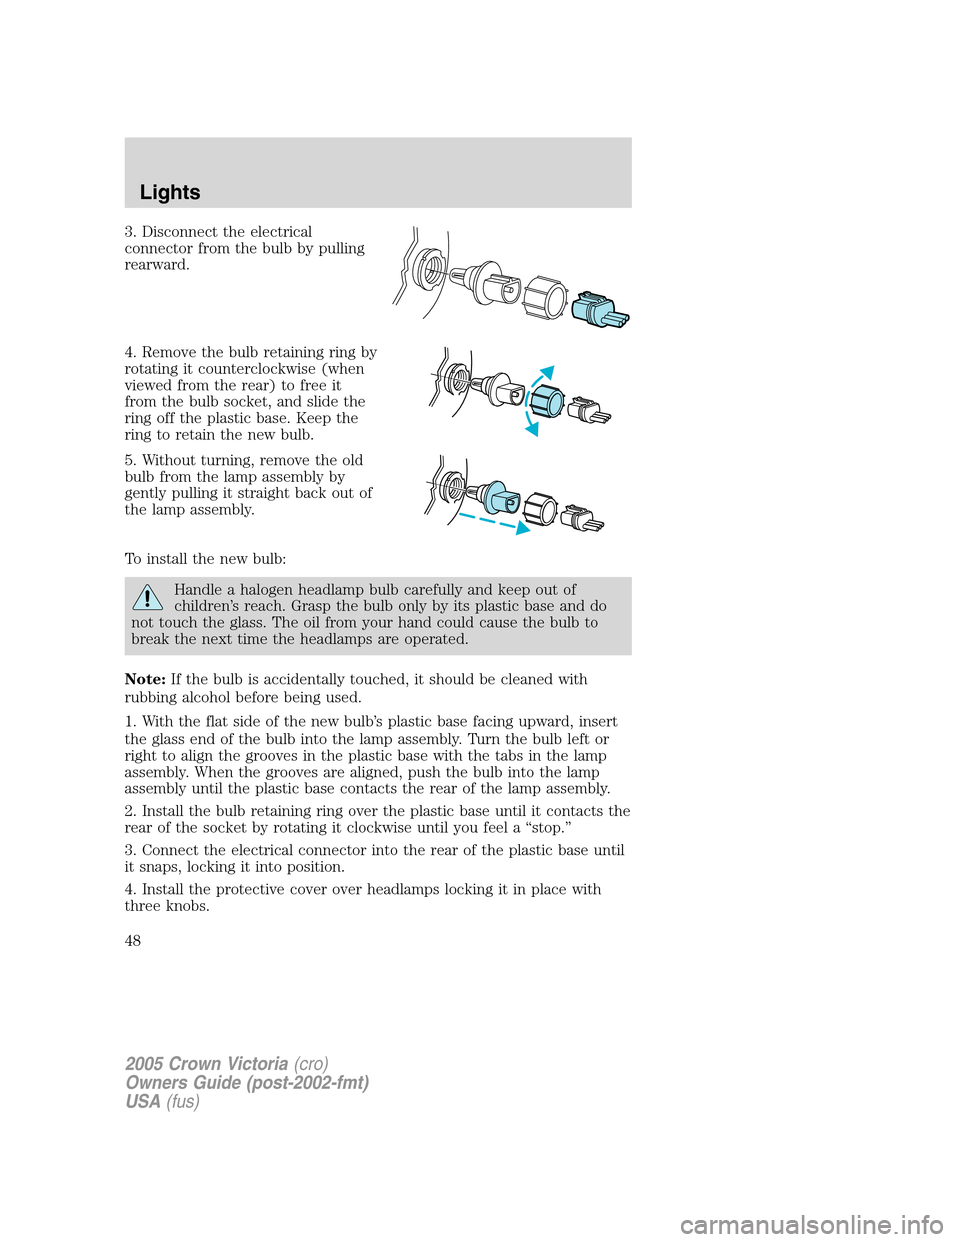 FORD CROWN VICTORIA 2005 2.G Owners Manual 3. Disconnect the electrical
connector from the bulb by pulling
rearward.
4. Remove the bulb retaining ring by
rotating it counterclockwise (when
viewed from the rear) to free it
from the bulb socket,